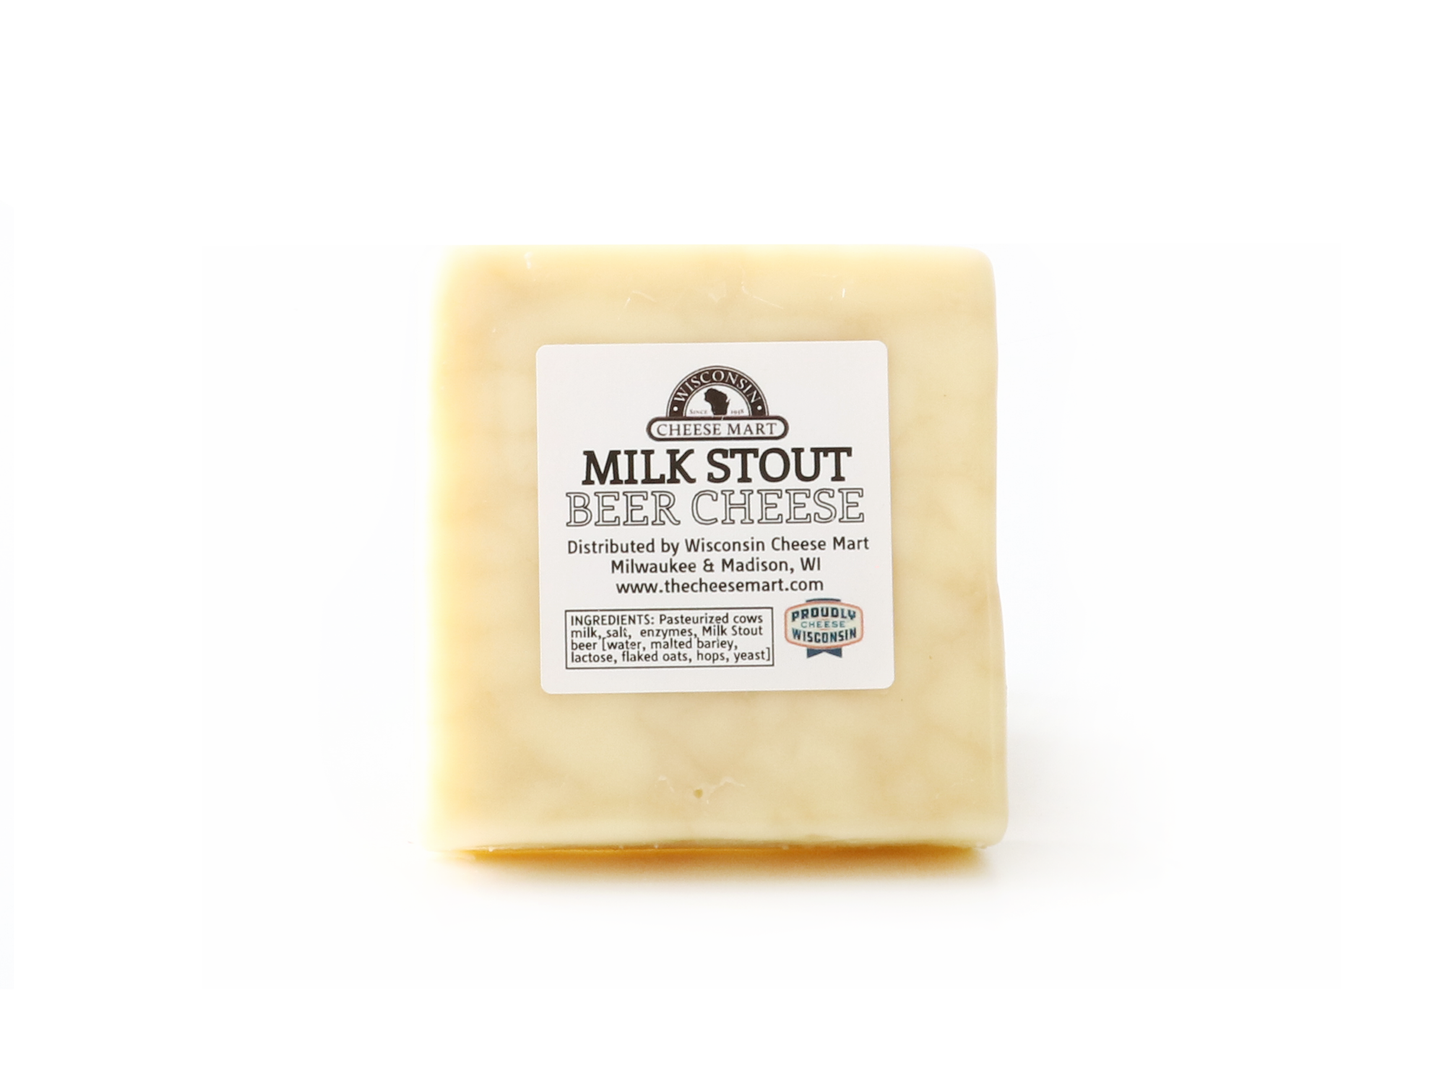 Beer Cheese Milk Stout